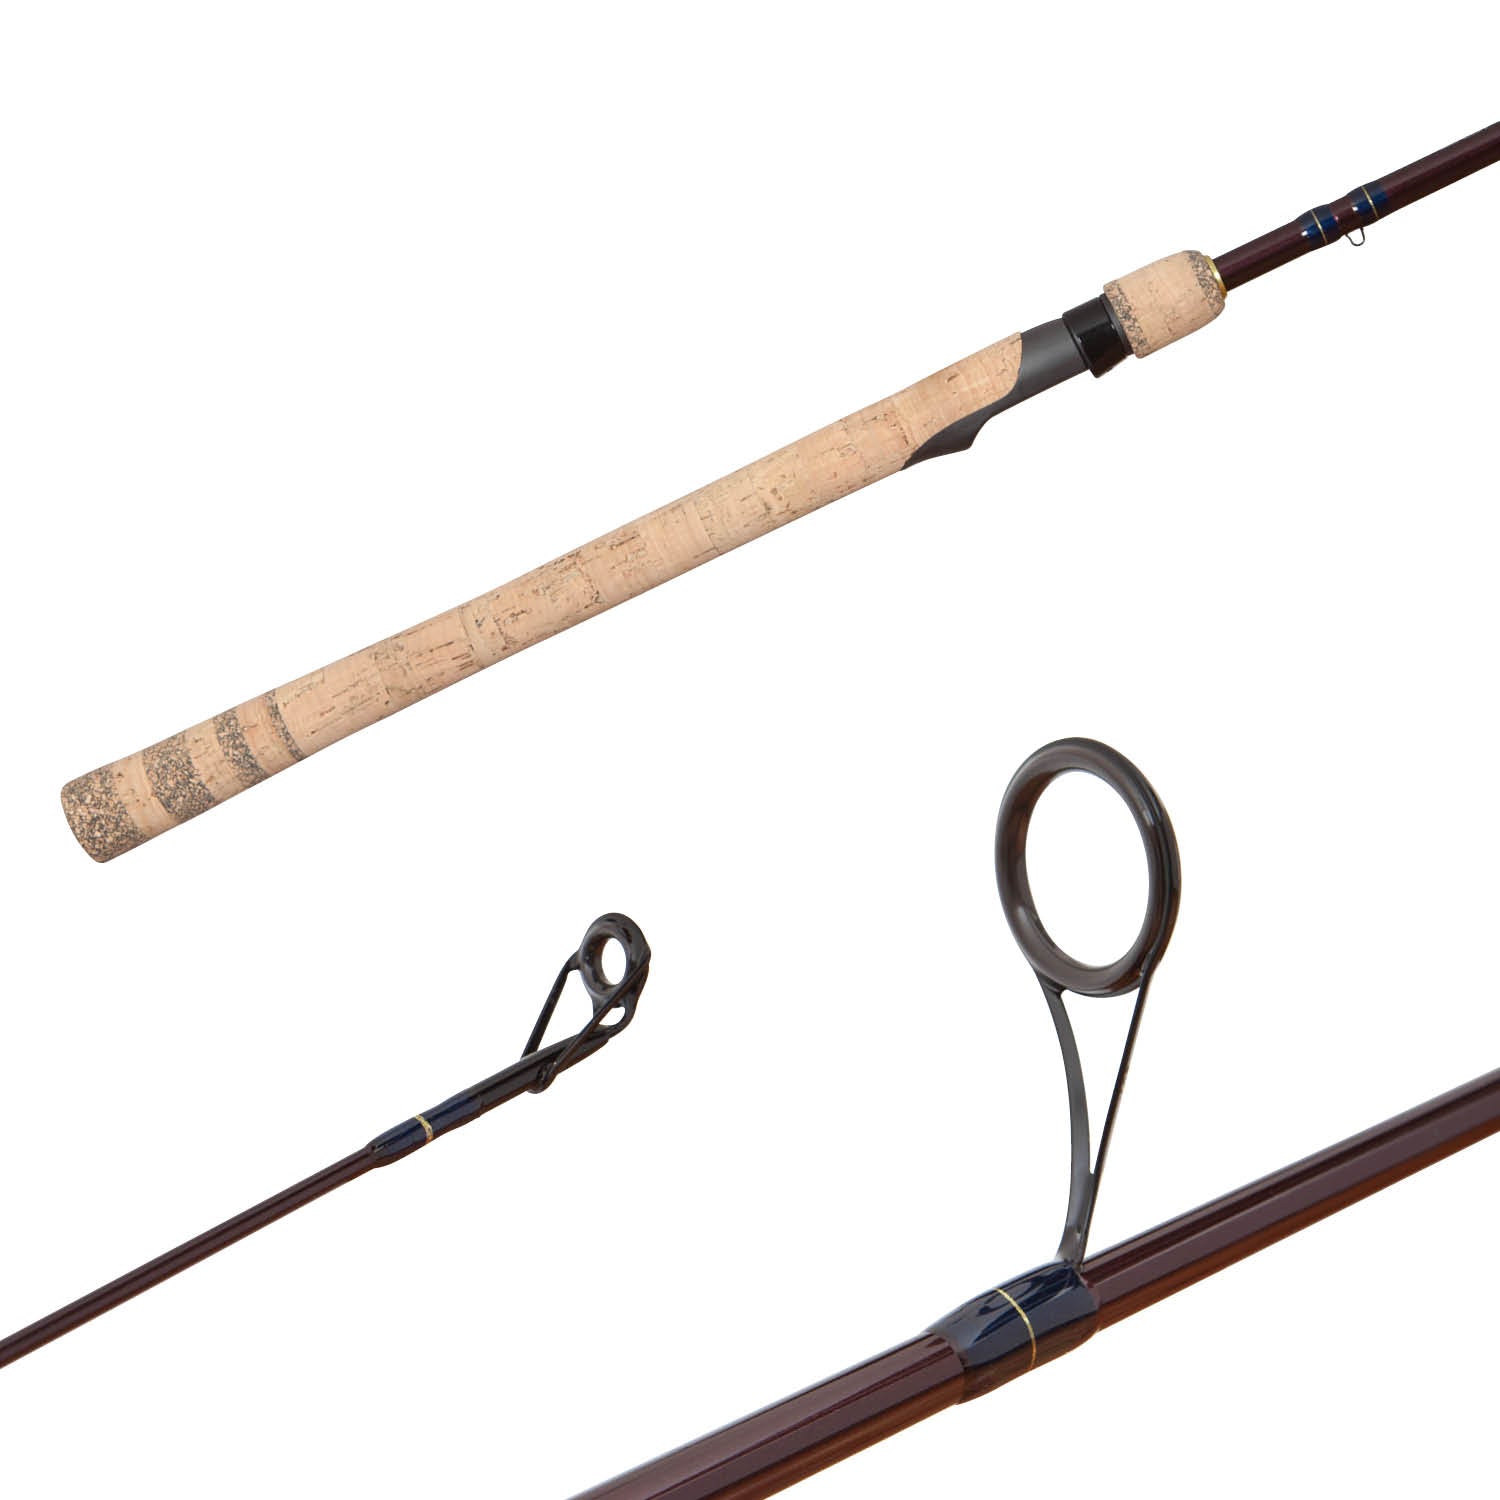 SHIMANO Convergence D Spinning Rod - 2 pcs Multi (Size: 7 ft.)